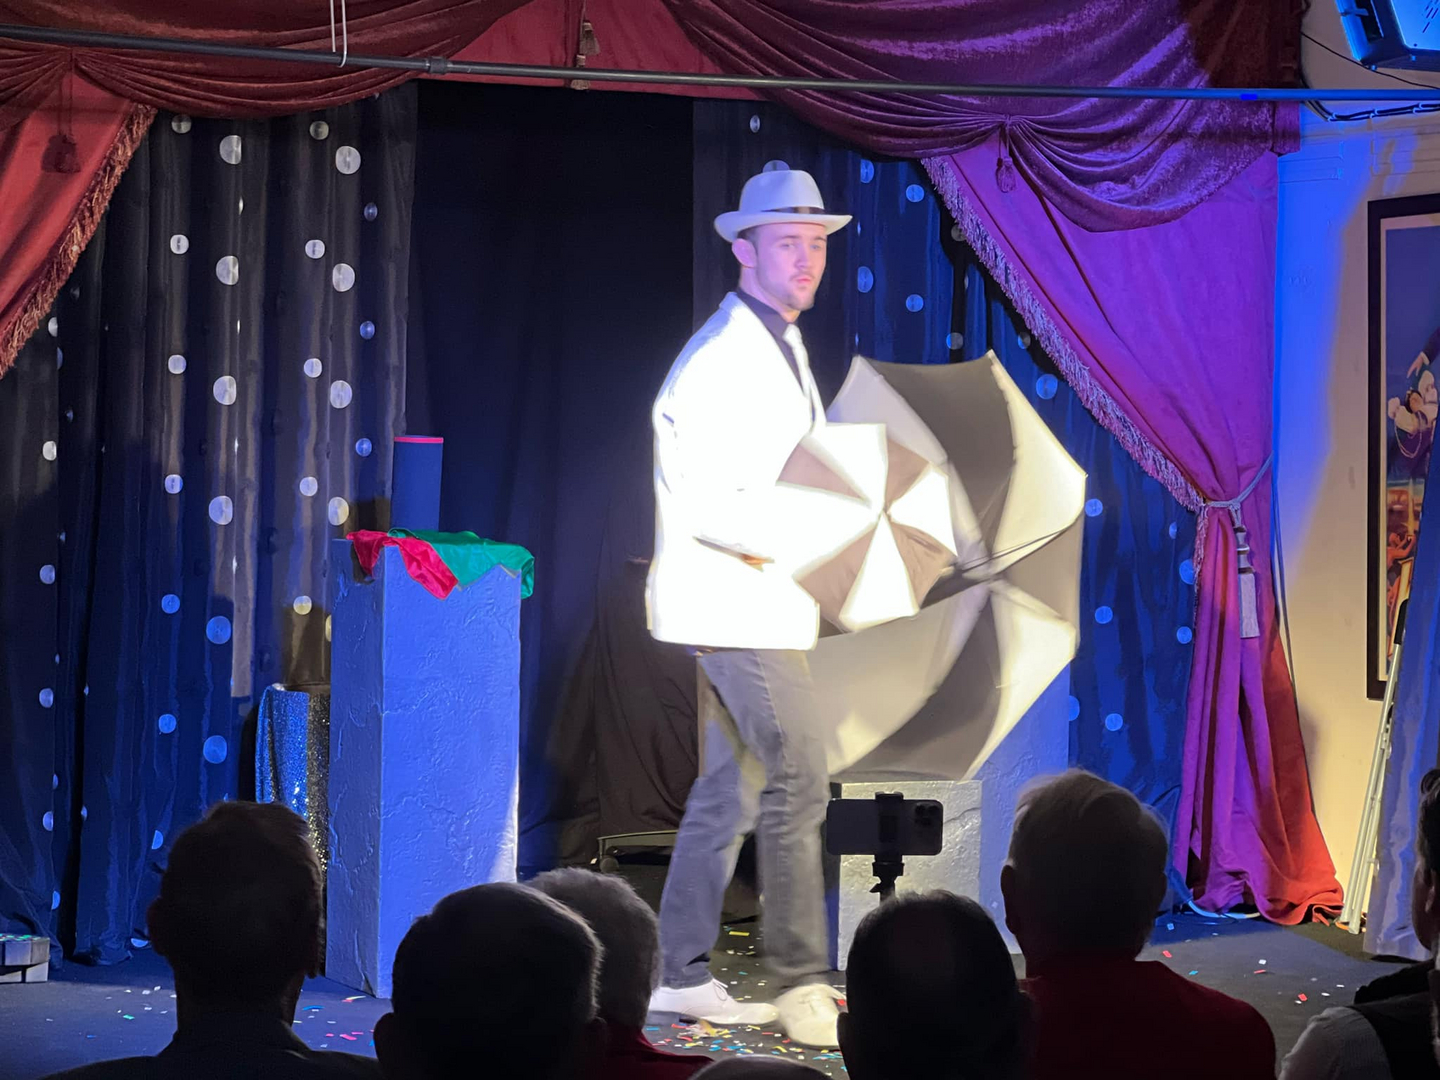 A man in a hat is holding an umbrella in front of an audience.